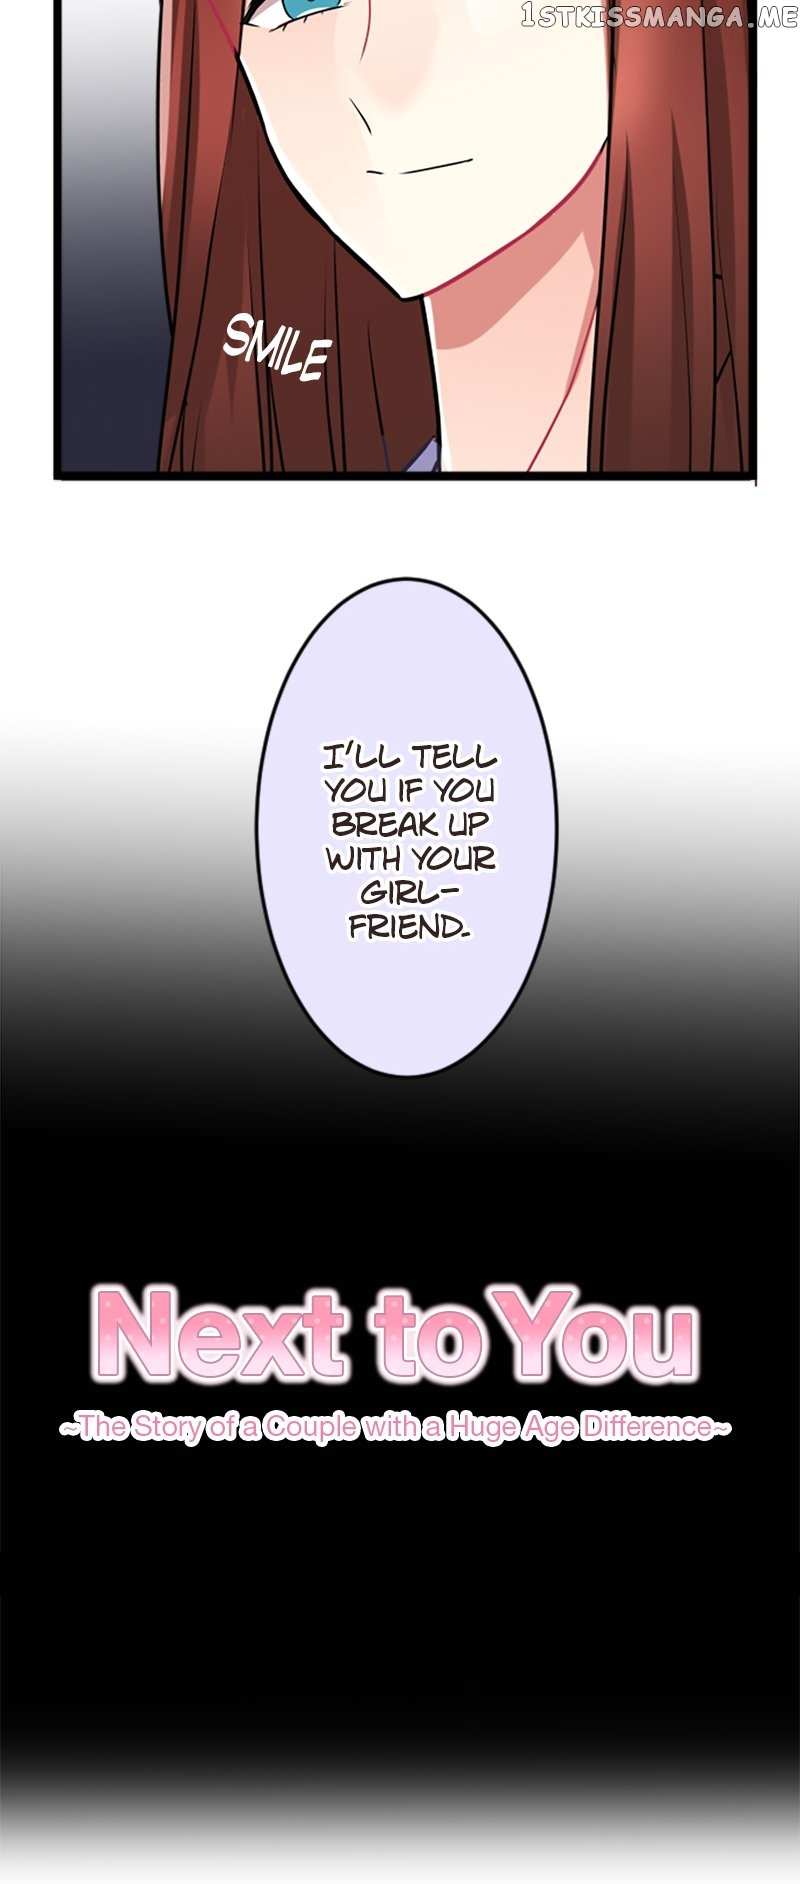 Next to You ~The Story of a Couple with a Huge Age Difference~ Chapter 129 - p2.45 - page 4